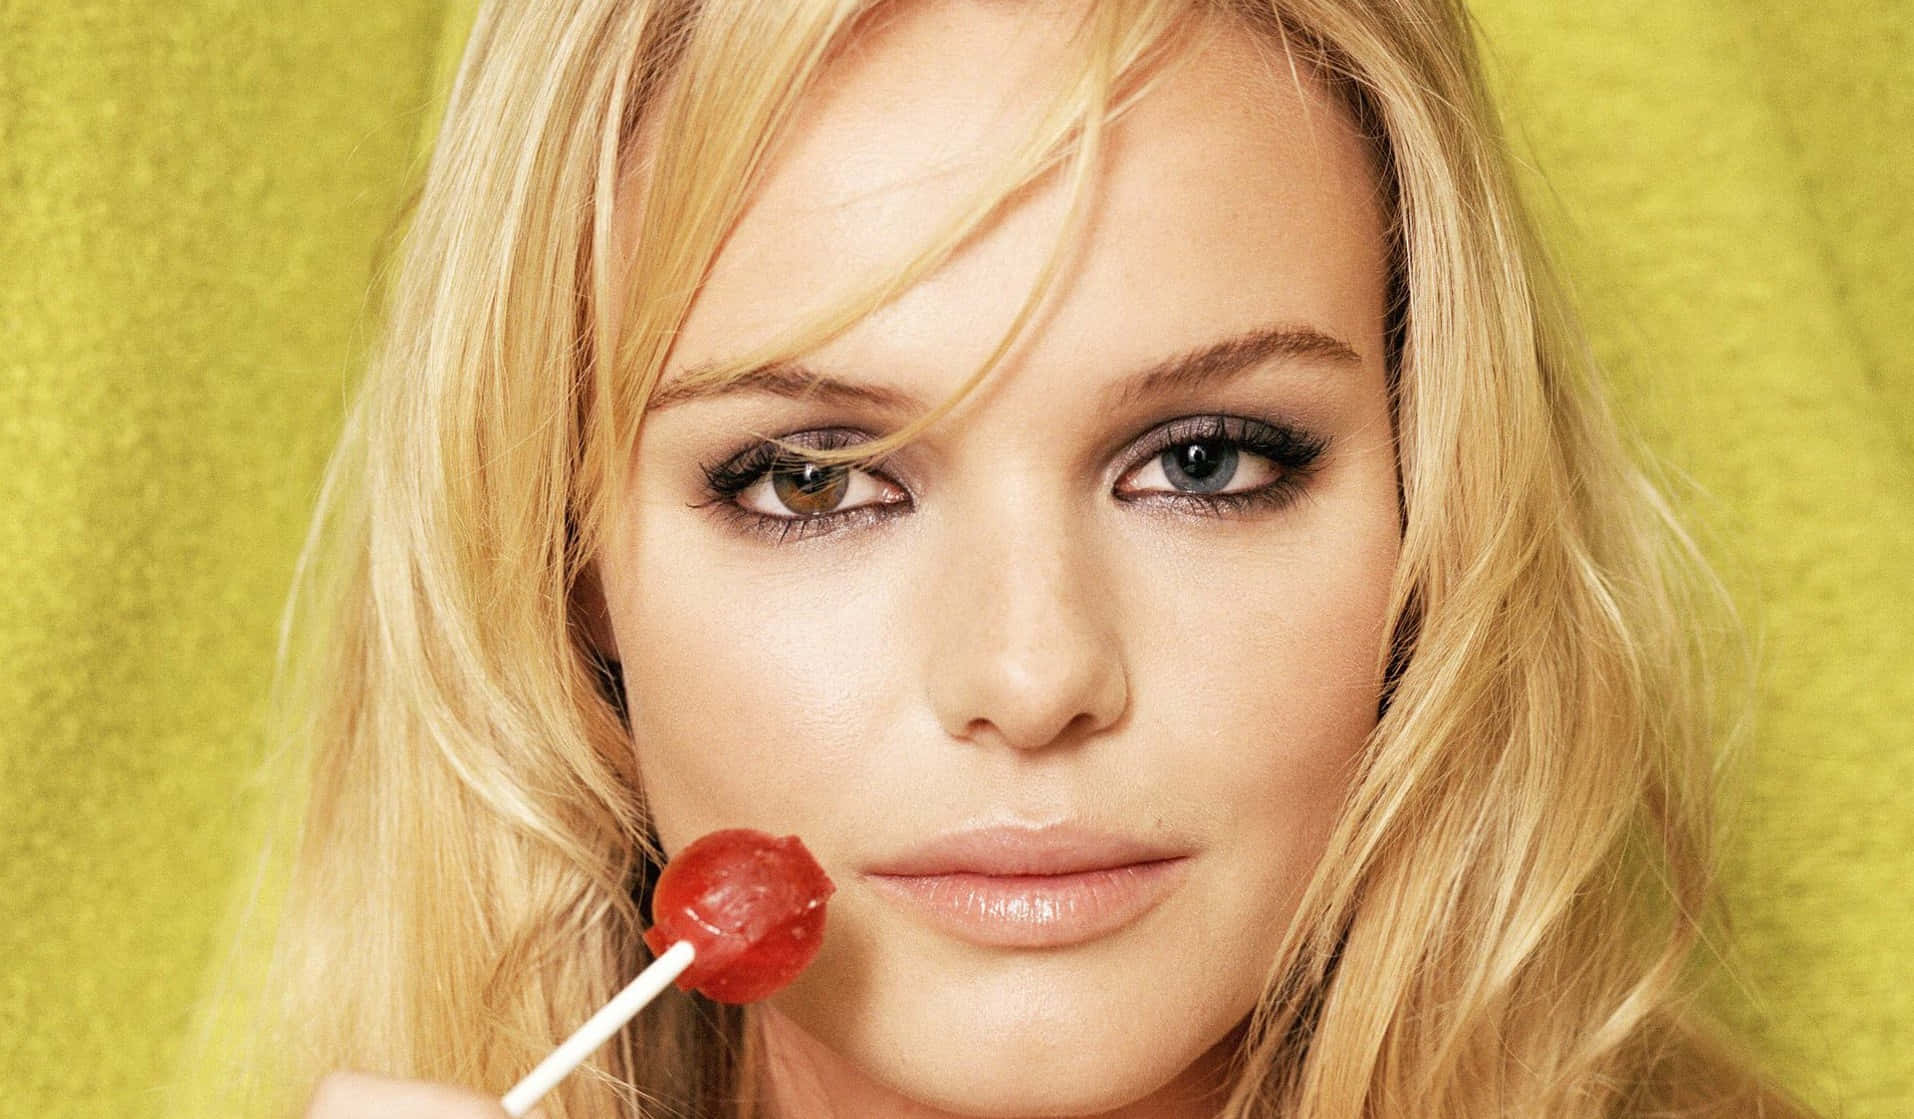 Kate Bosworth radiates elegance and charm in a stunning portrait Wallpaper